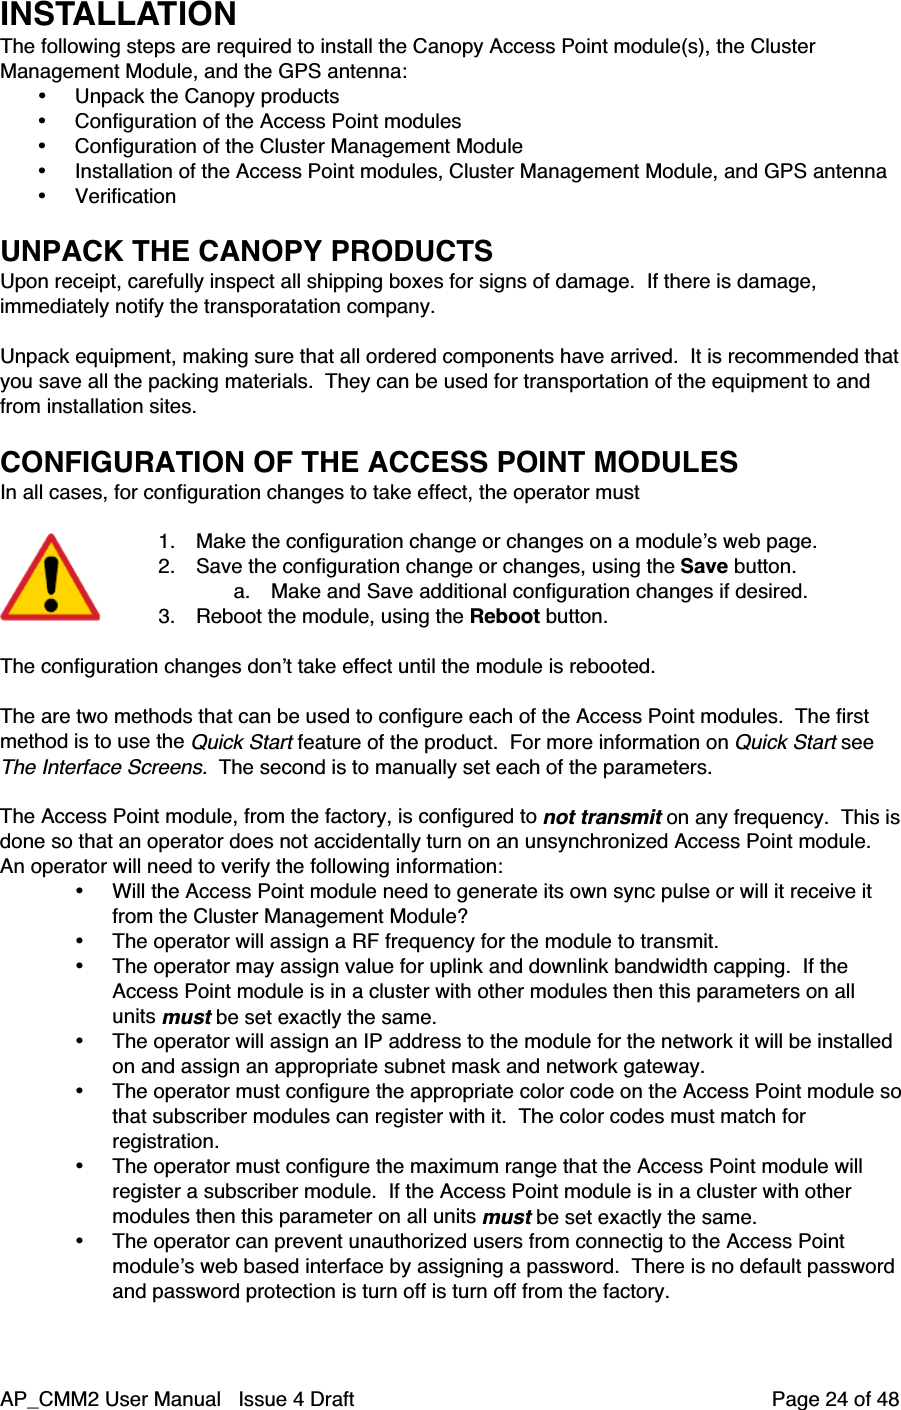 AP_CMM2 User Manual   Issue 4 Draft         Page 24 of 48INSTALLATIONThe following steps are required to install the Canopy Access Point module(s), the ClusterManagement Module, and the GPS antenna:• Unpack the Canopy products• Configuration of the Access Point modules• Configuration of the Cluster Management Module• Installation of the Access Point modules, Cluster Management Module, and GPS antenna• VerificationUNPACK THE CANOPY PRODUCTSUpon receipt, carefully inspect all shipping boxes for signs of damage.  If there is damage,immediately notify the transporatation company.Unpack equipment, making sure that all ordered components have arrived.  It is recommended thatyou save all the packing materials.  They can be used for transportation of the equipment to andfrom installation sites.CONFIGURATION OF THE ACCESS POINT MODULESIn all cases, for configuration changes to take effect, the operator must1. Make the configuration change or changes on a module’s web page.2. Save the configuration change or changes, using the Save button.a. Make and Save additional configuration changes if desired.3. Reboot the module, using the Reboot button.The configuration changes don’t take effect until the module is rebooted.The are two methods that can be used to configure each of the Access Point modules.  The firstmethod is to use the Quick Start feature of the product.  For more information on Quick Start seeThe Interface Screens.  The second is to manually set each of the parameters.The Access Point module, from the factory, is configured to not transmit on any frequency.  This isdone so that an operator does not accidentally turn on an unsynchronized Access Point module.An operator will need to verify the following information:• Will the Access Point module need to generate its own sync pulse or will it receive itfrom the Cluster Management Module?• The operator will assign a RF frequency for the module to transmit.• The operator may assign value for uplink and downlink bandwidth capping.  If theAccess Point module is in a cluster with other modules then this parameters on allunits must be set exactly the same.• The operator will assign an IP address to the module for the network it will be installedon and assign an appropriate subnet mask and network gateway.• The operator must configure the appropriate color code on the Access Point module sothat subscriber modules can register with it.  The color codes must match forregistration.• The operator must configure the maximum range that the Access Point module willregister a subscriber module.  If the Access Point module is in a cluster with othermodules then this parameter on all units must be set exactly the same.• The operator can prevent unauthorized users from connectig to the Access Pointmodule’s web based interface by assigning a password.  There is no default passwordand password protection is turn off is turn off from the factory.